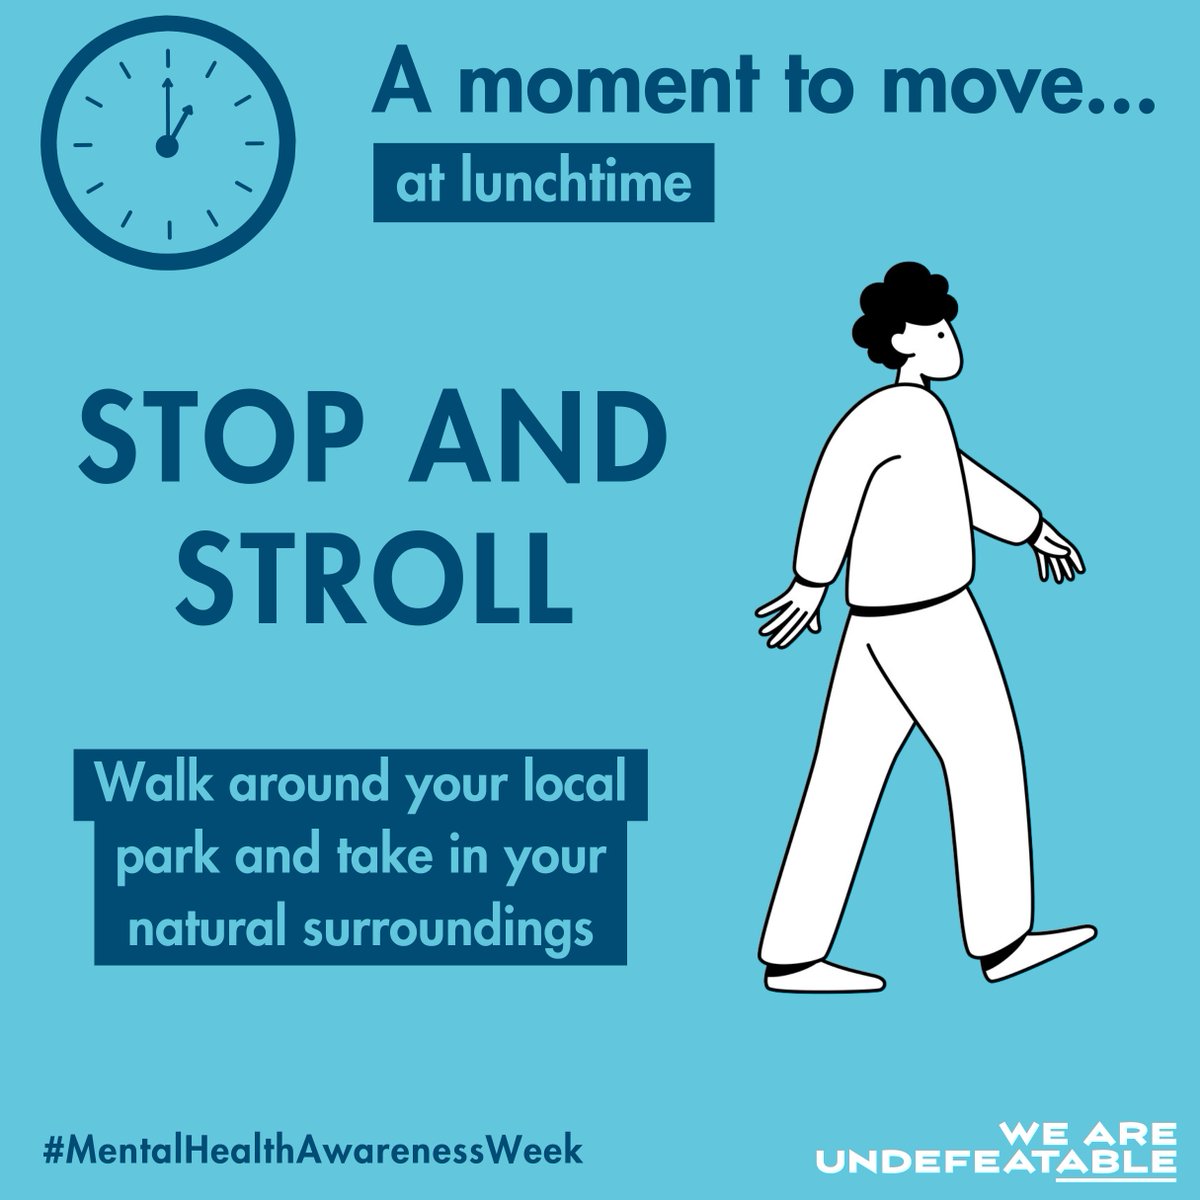 Boost your mood at lunchtime with a gentle walk 🚶‍♂️Whether it’s 5 minutes around the block or a longer stroll through the park, step out and take in your surroundings. Keep an eye on our page throughout the week for more ideas on how to get moving 💚